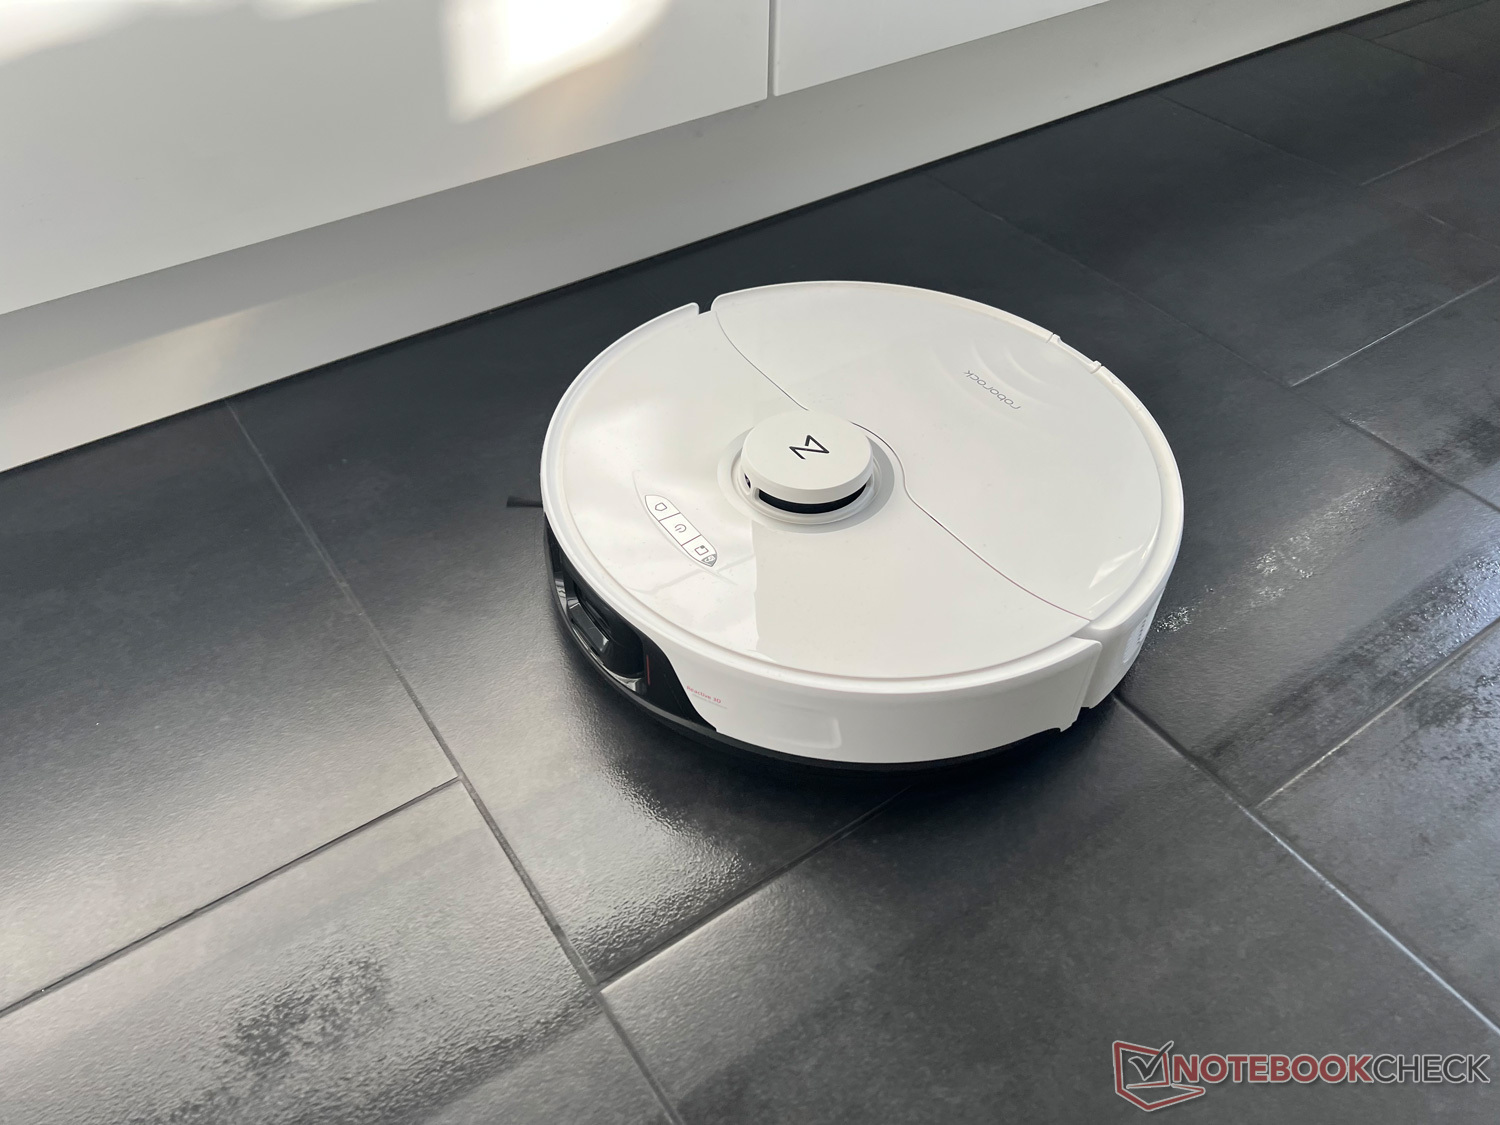 Roborock S7 review round-up: It sucks and mops